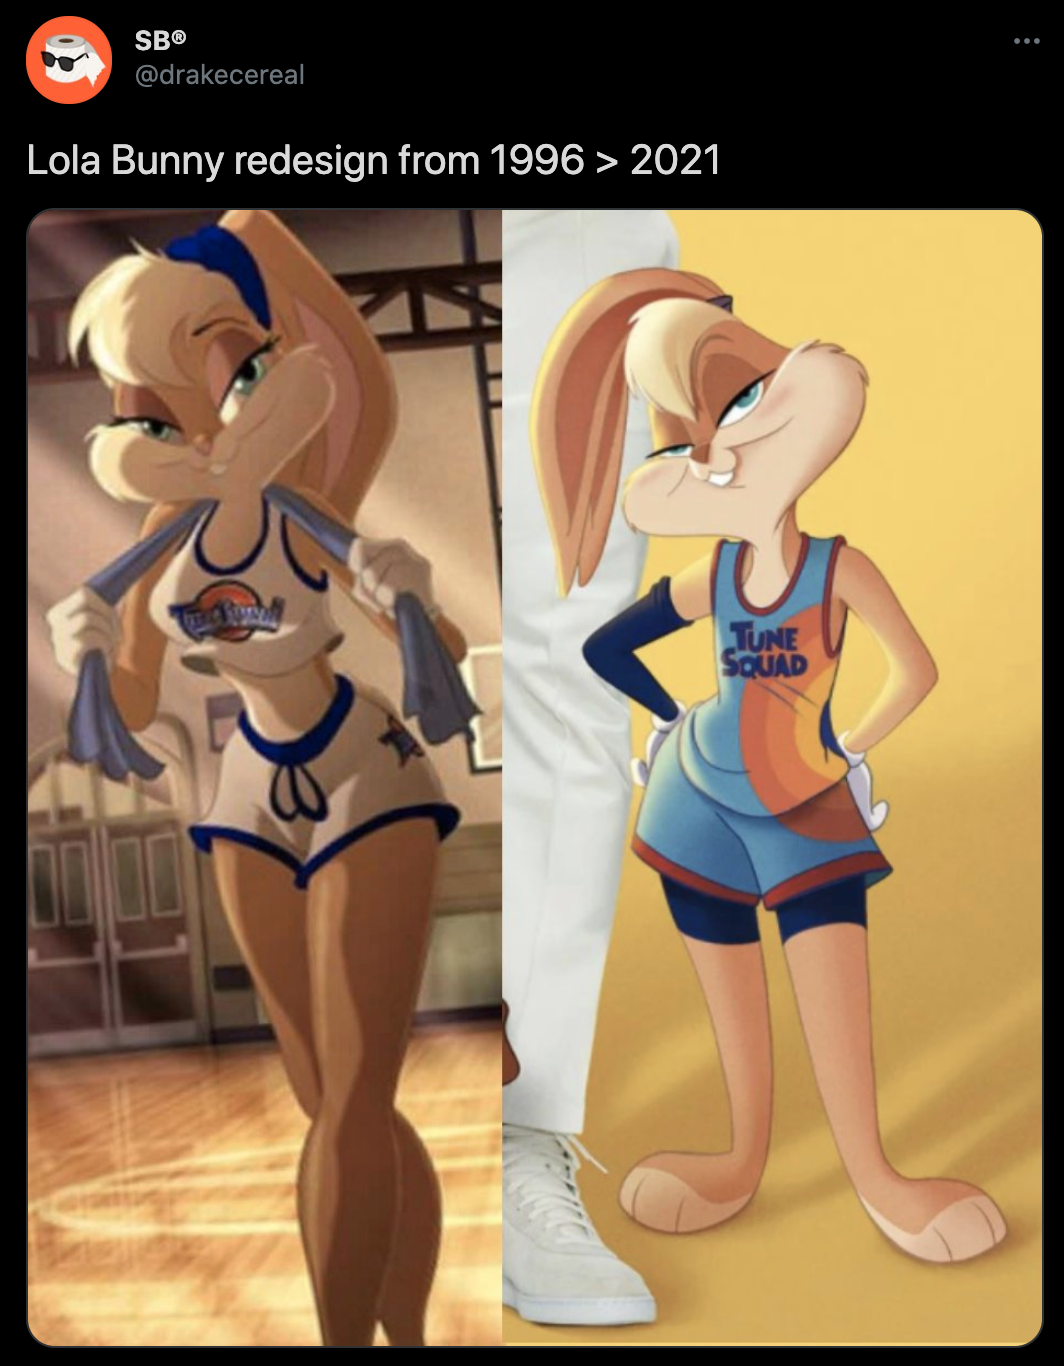 Lola Bunny redesign from 1996 > 2021